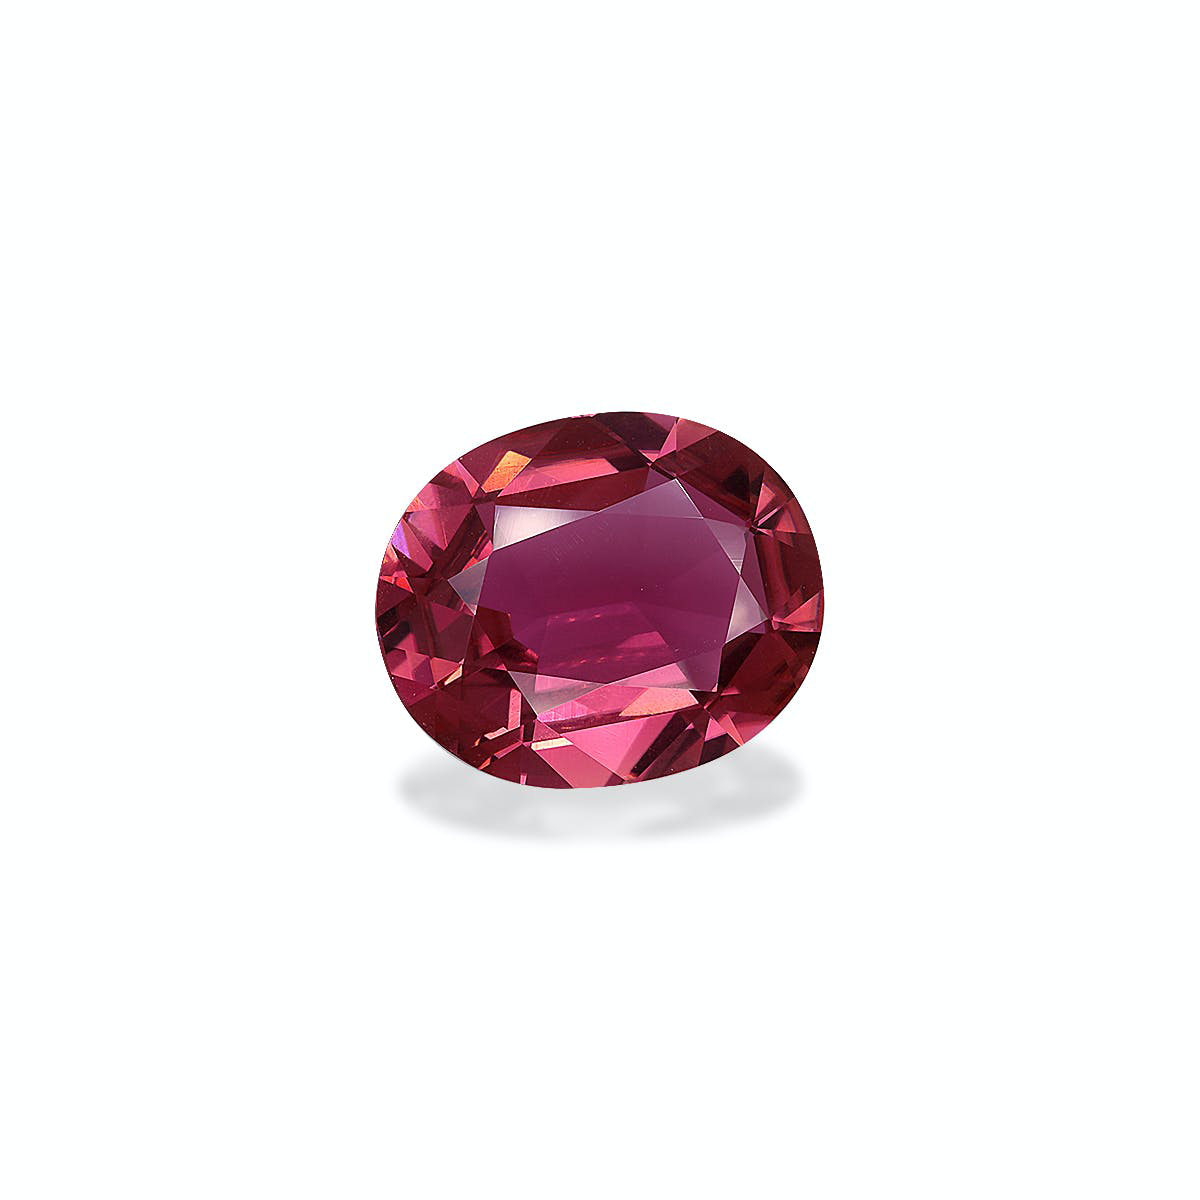 Picture of Rosewood Pink Tourmaline 8.78ct (PT1240)